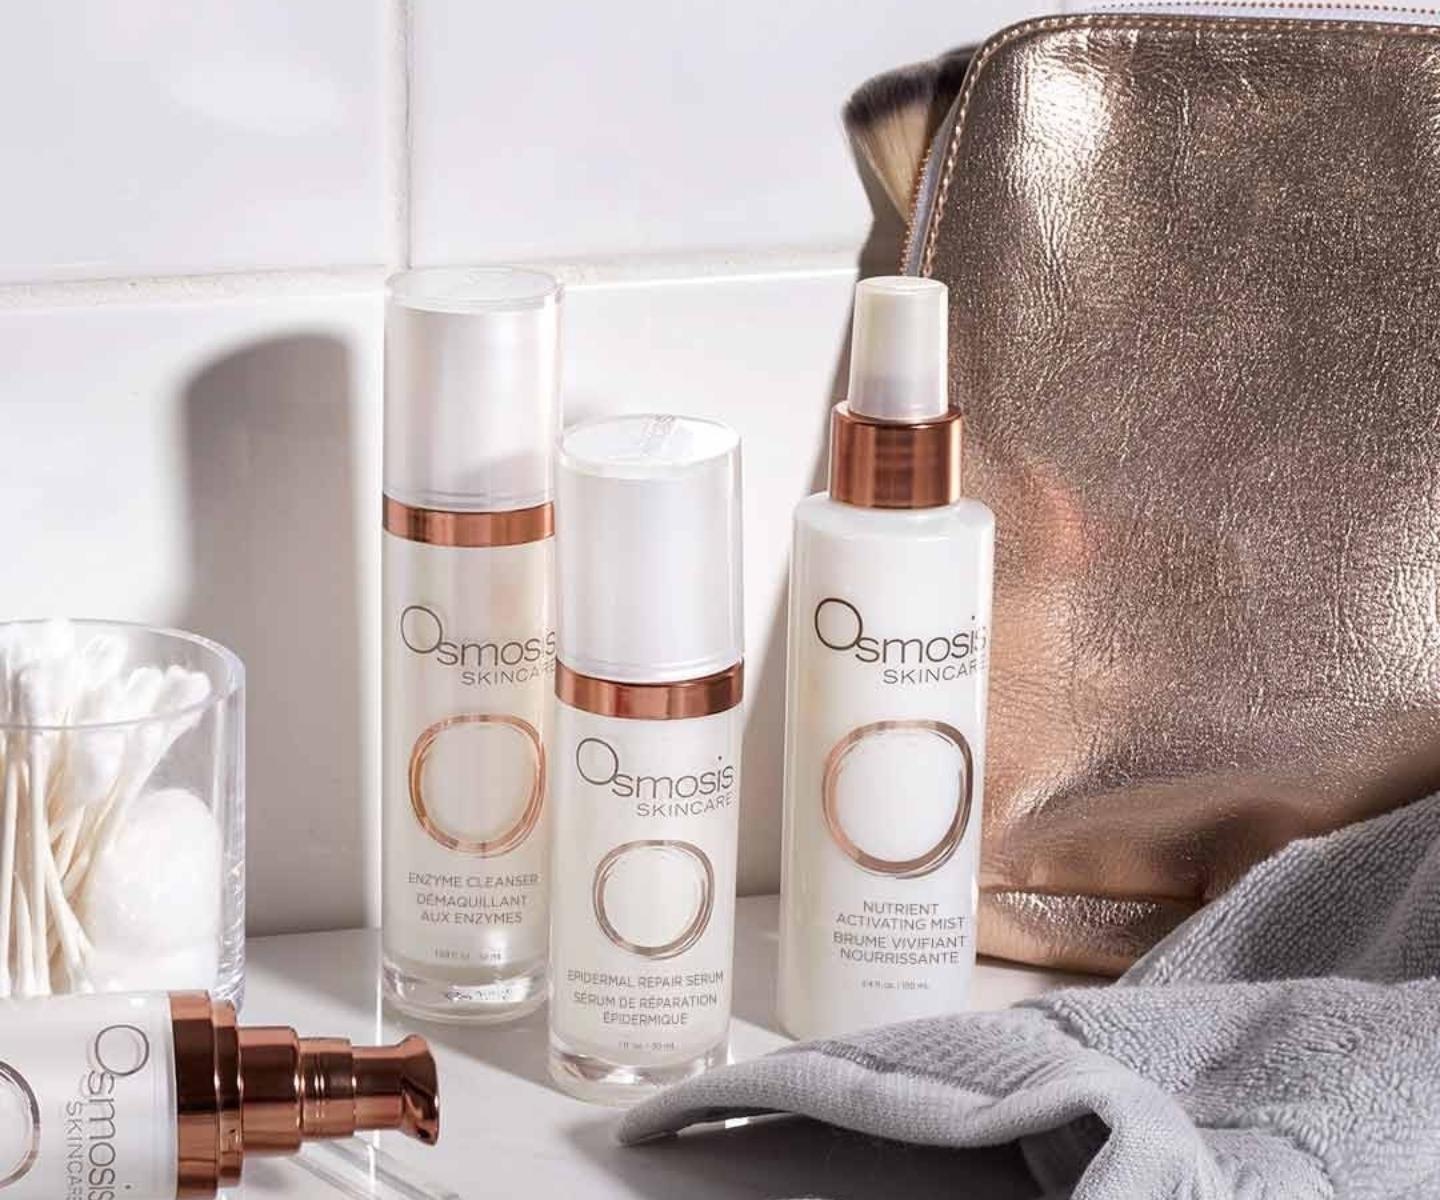 Osmosis Skin Care Products